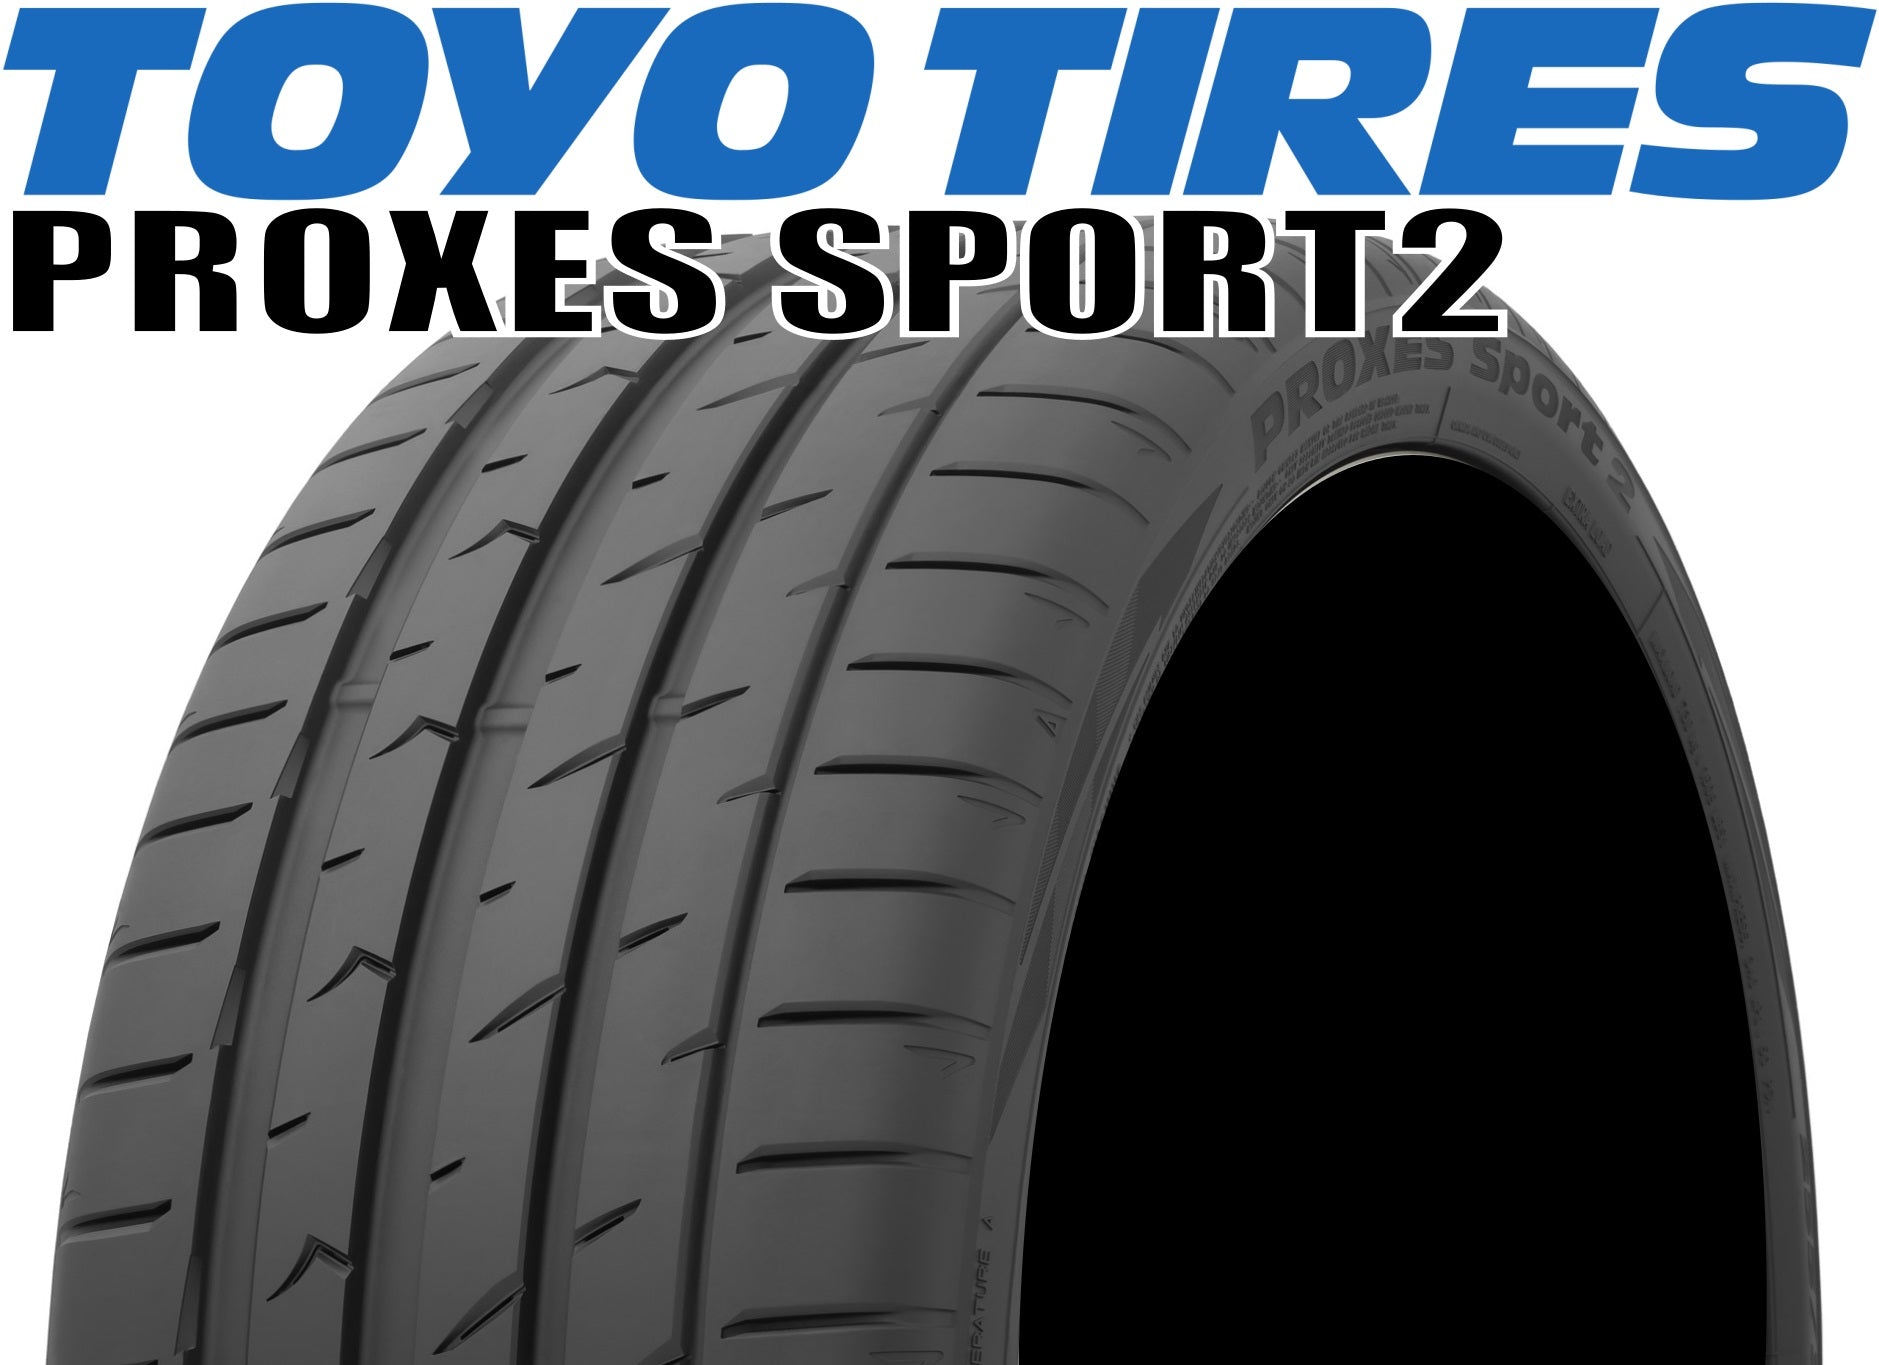 TOYO TIRES PROXES SPORT2(トーヨー プロクセススポーツ) 245/45R19 102Y XL 245/45-19